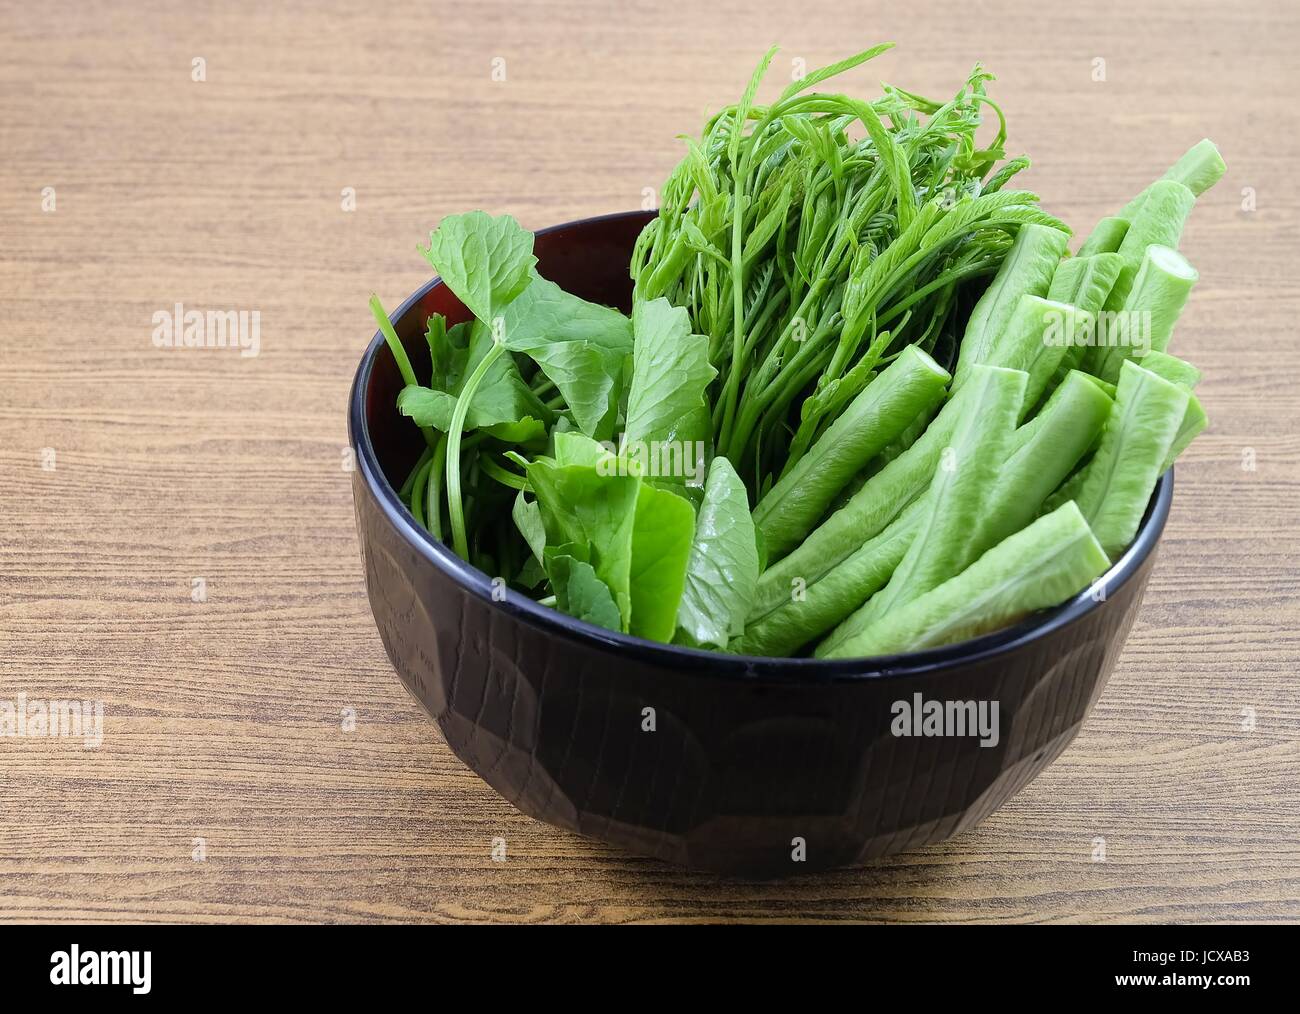 Vegetable, A Bowl of Fresh Green Cowpeas, Leucaena Leucocephala and Gotu Kola Leaves on Wooden Table with Copy Space for Text Decorated. Stock Photo